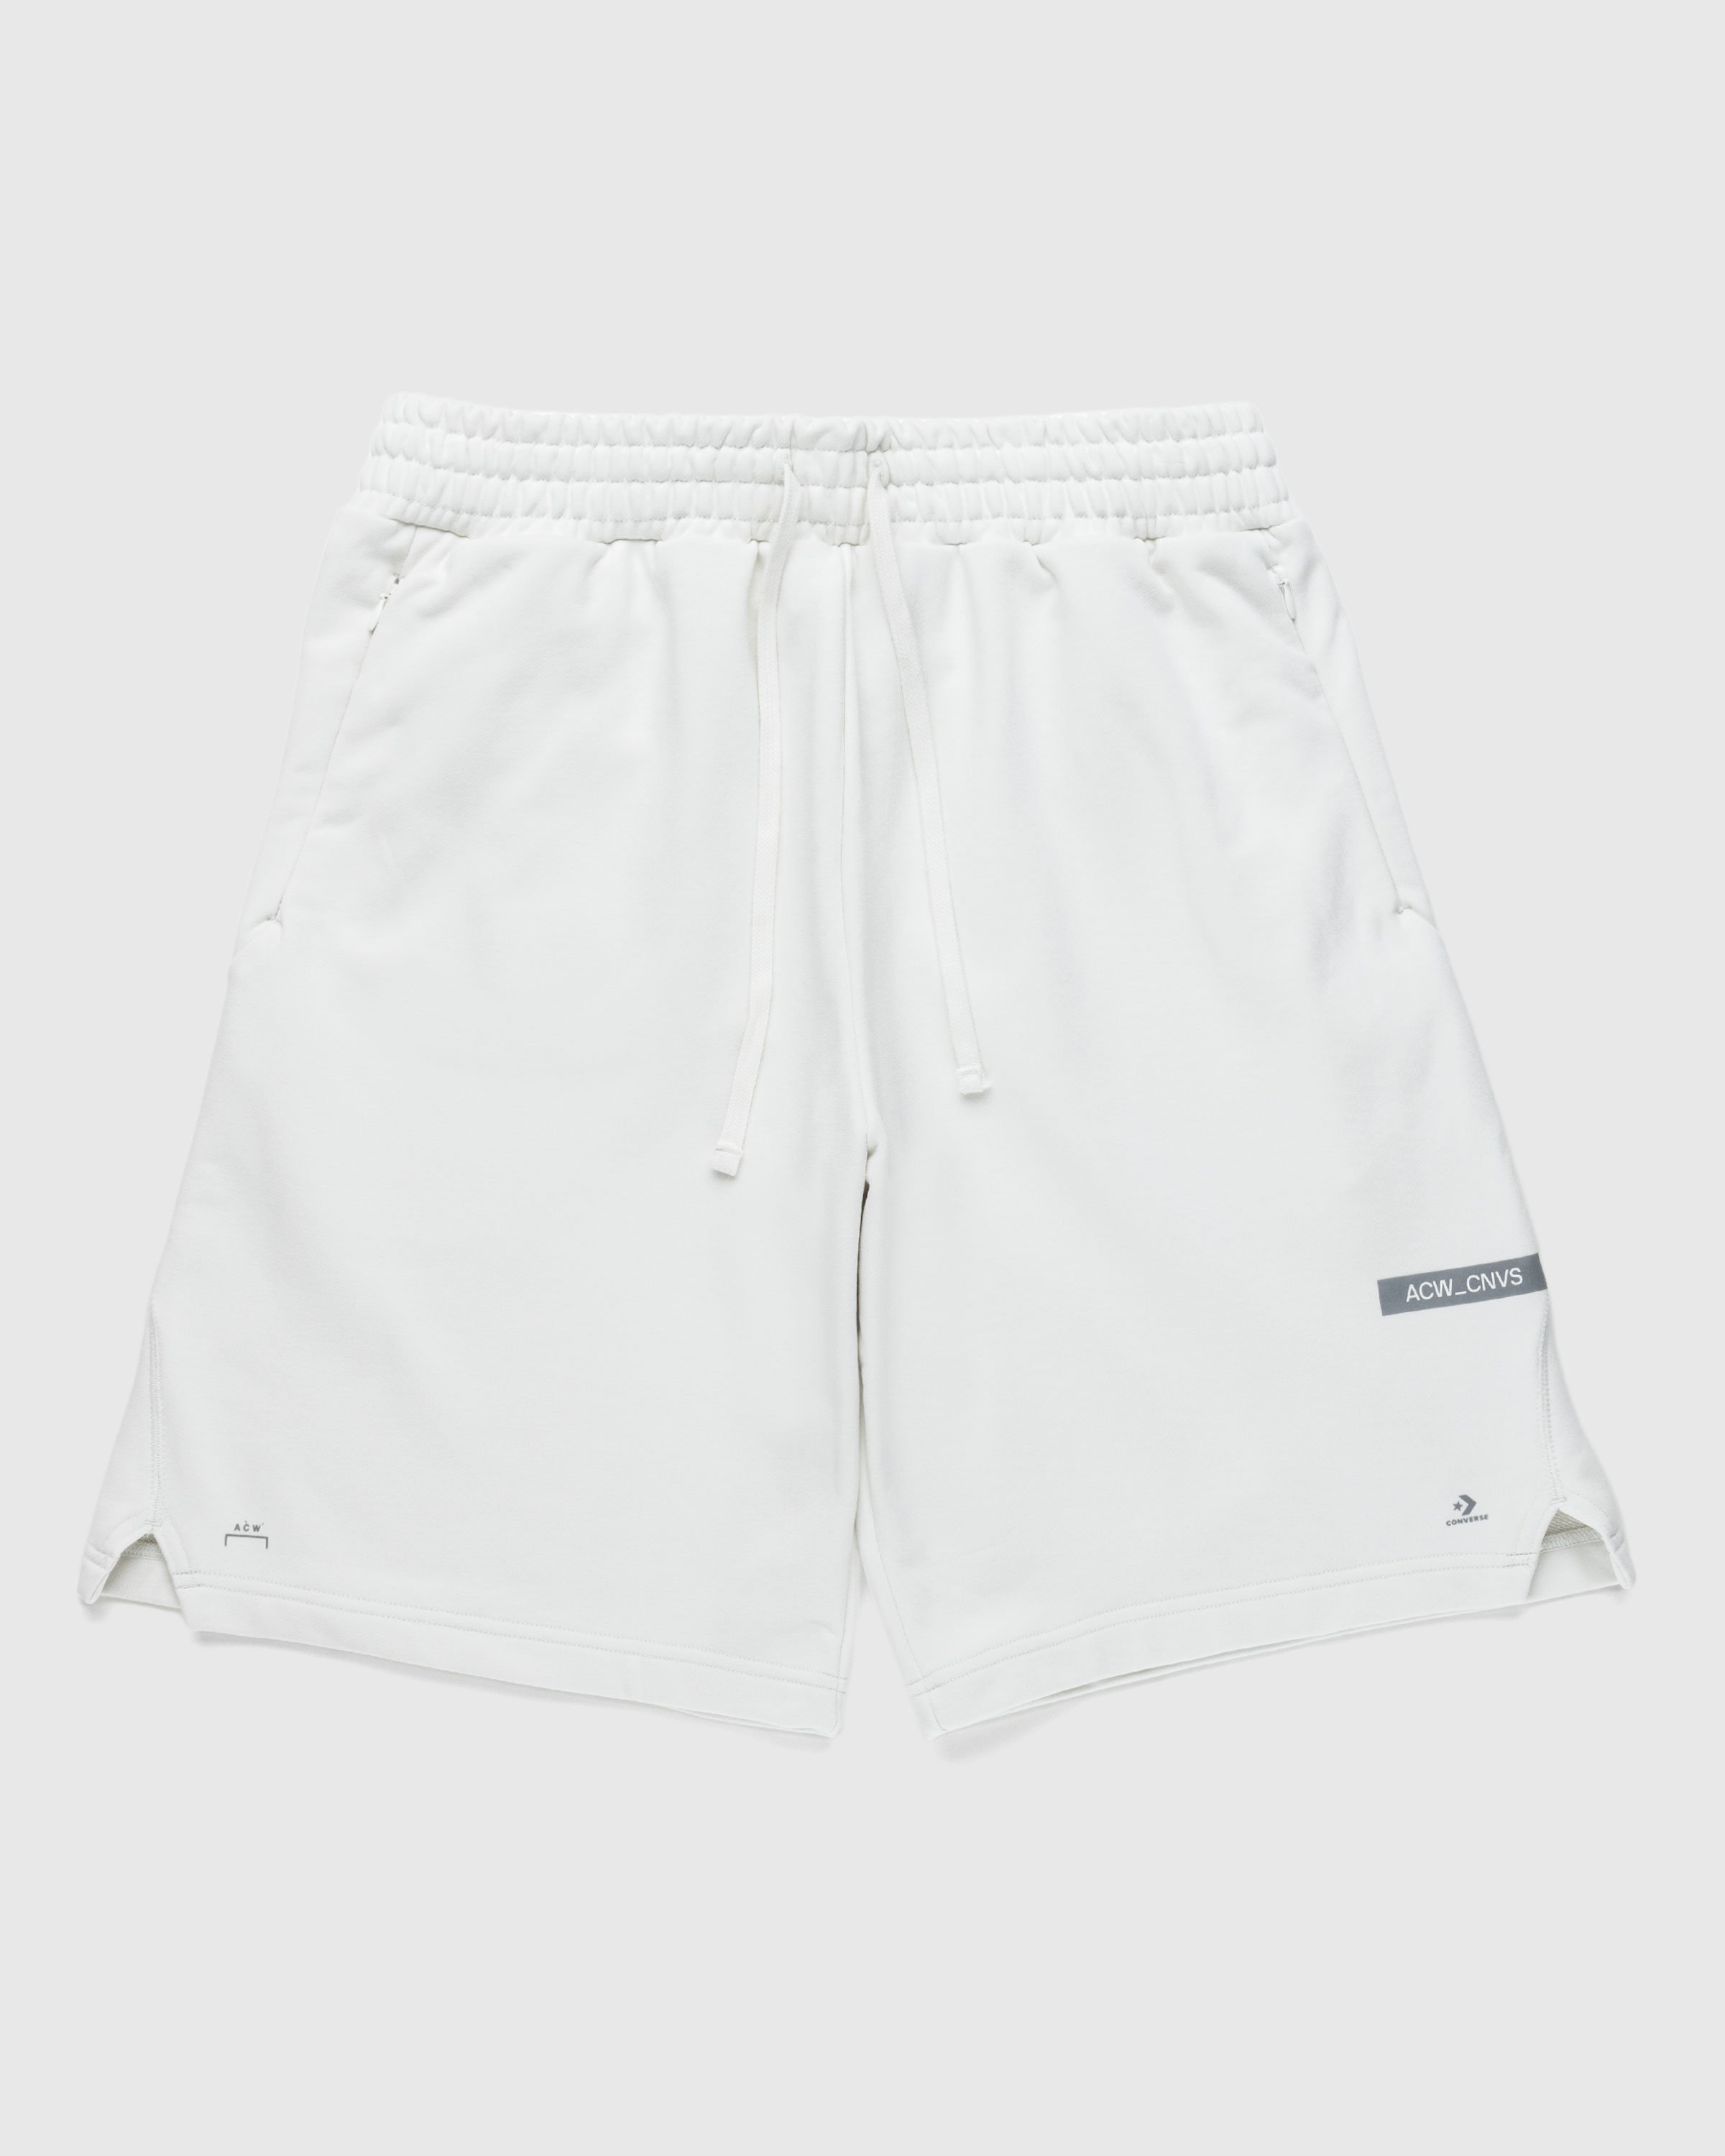 Converse x A-Cold-Wall* – Reflective Shorts Stone | Highsnobiety Shop